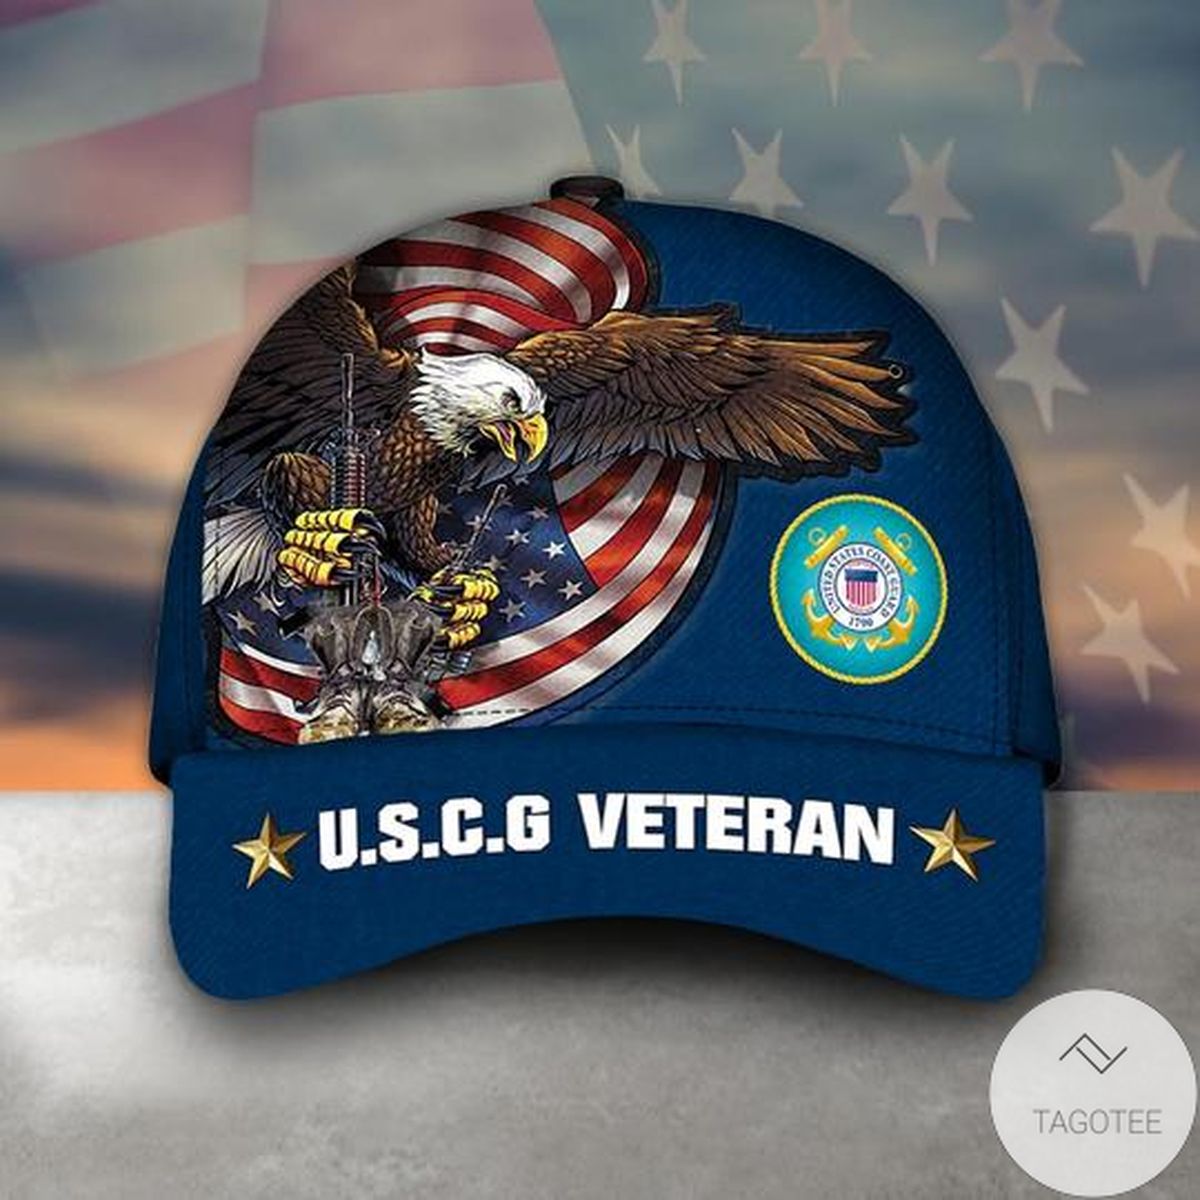 Armed Forces Uscg Coast Guard Veteran Military Soldier Cap